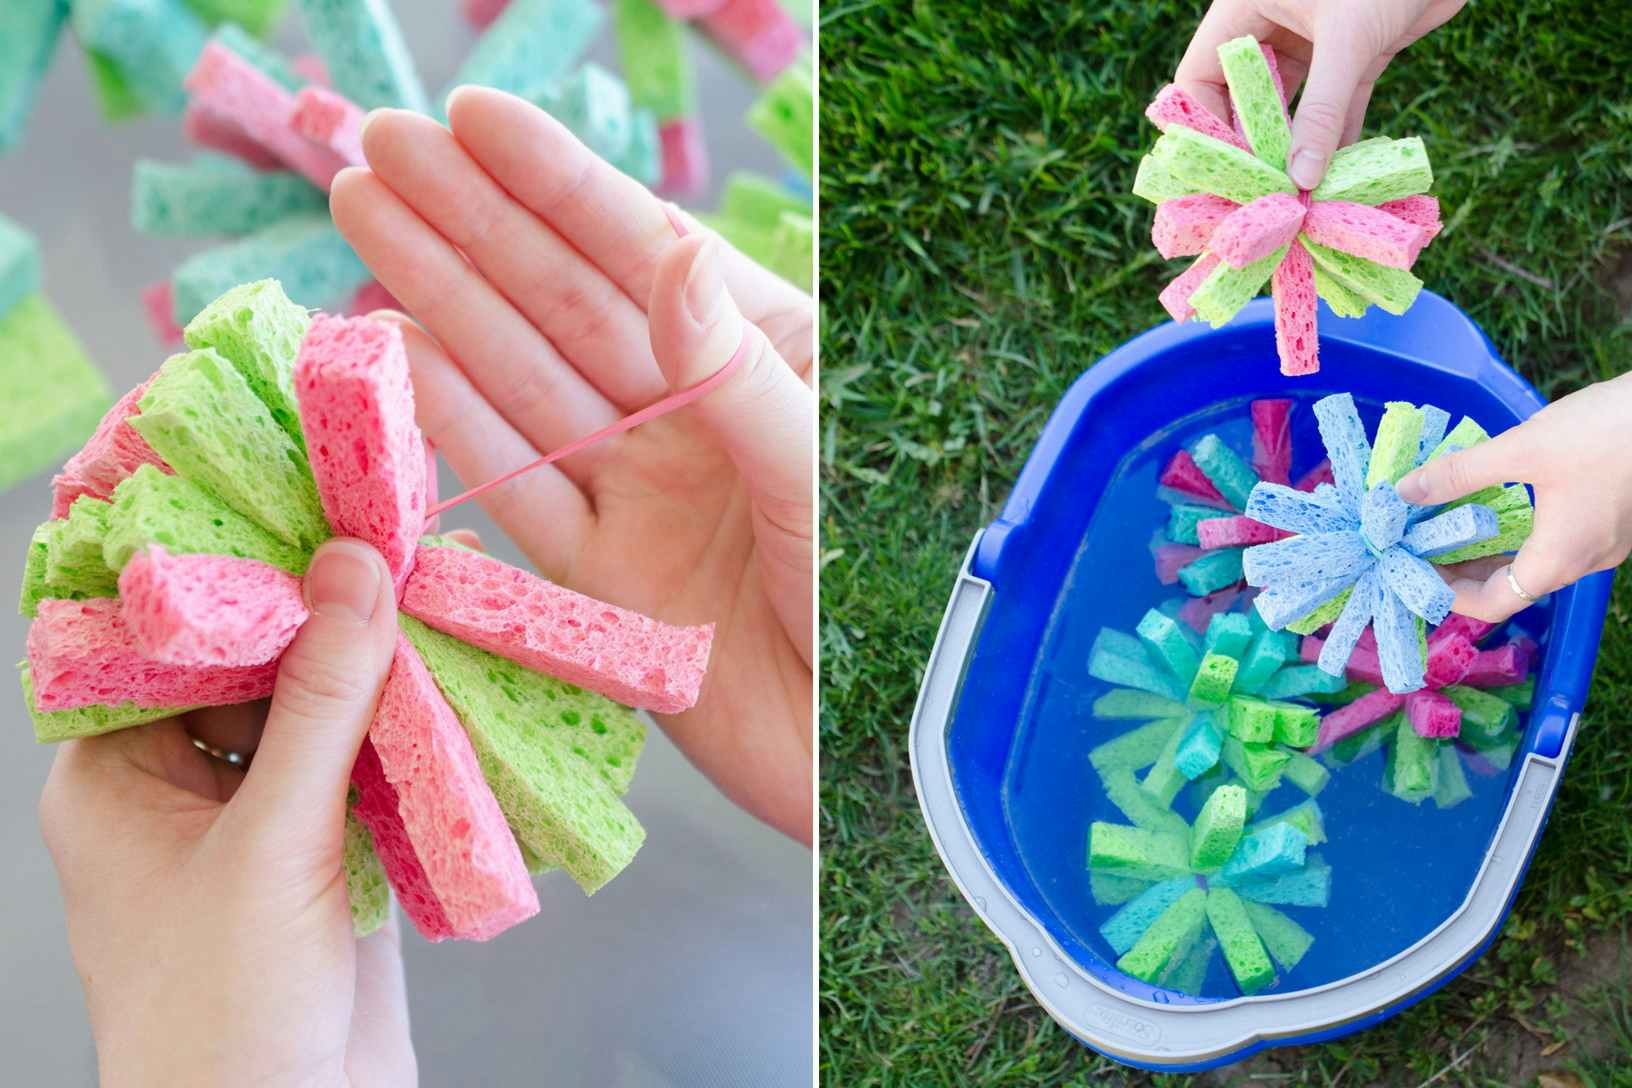 Someone tying the cut sponges together and placing them in a bucket with water.